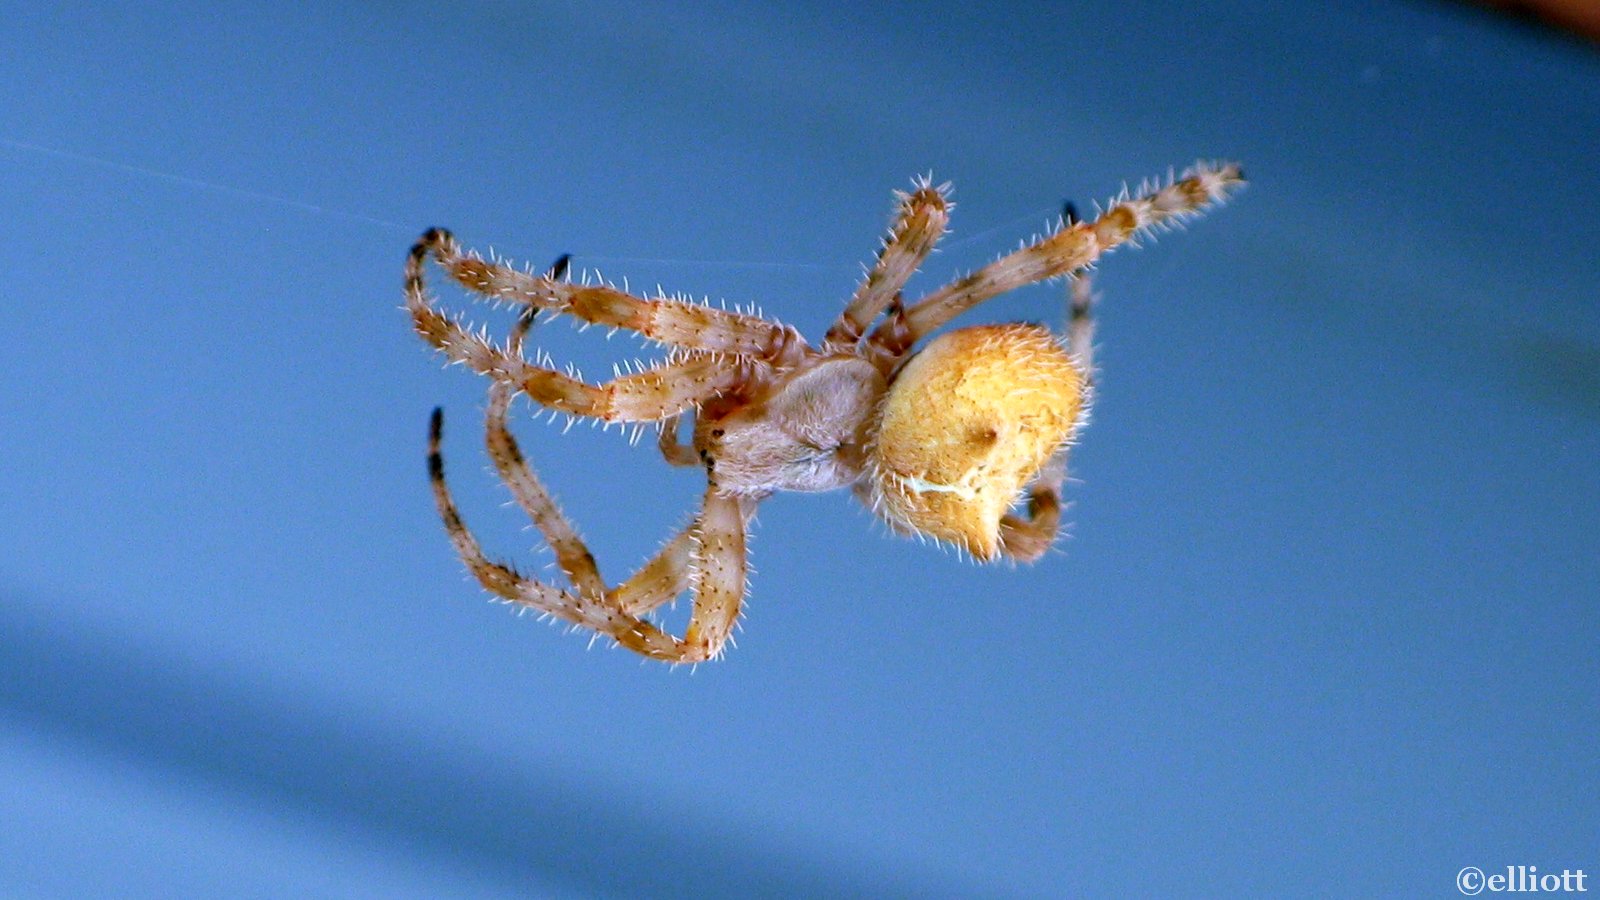 cat-faced spider - North American Insects & Spiders